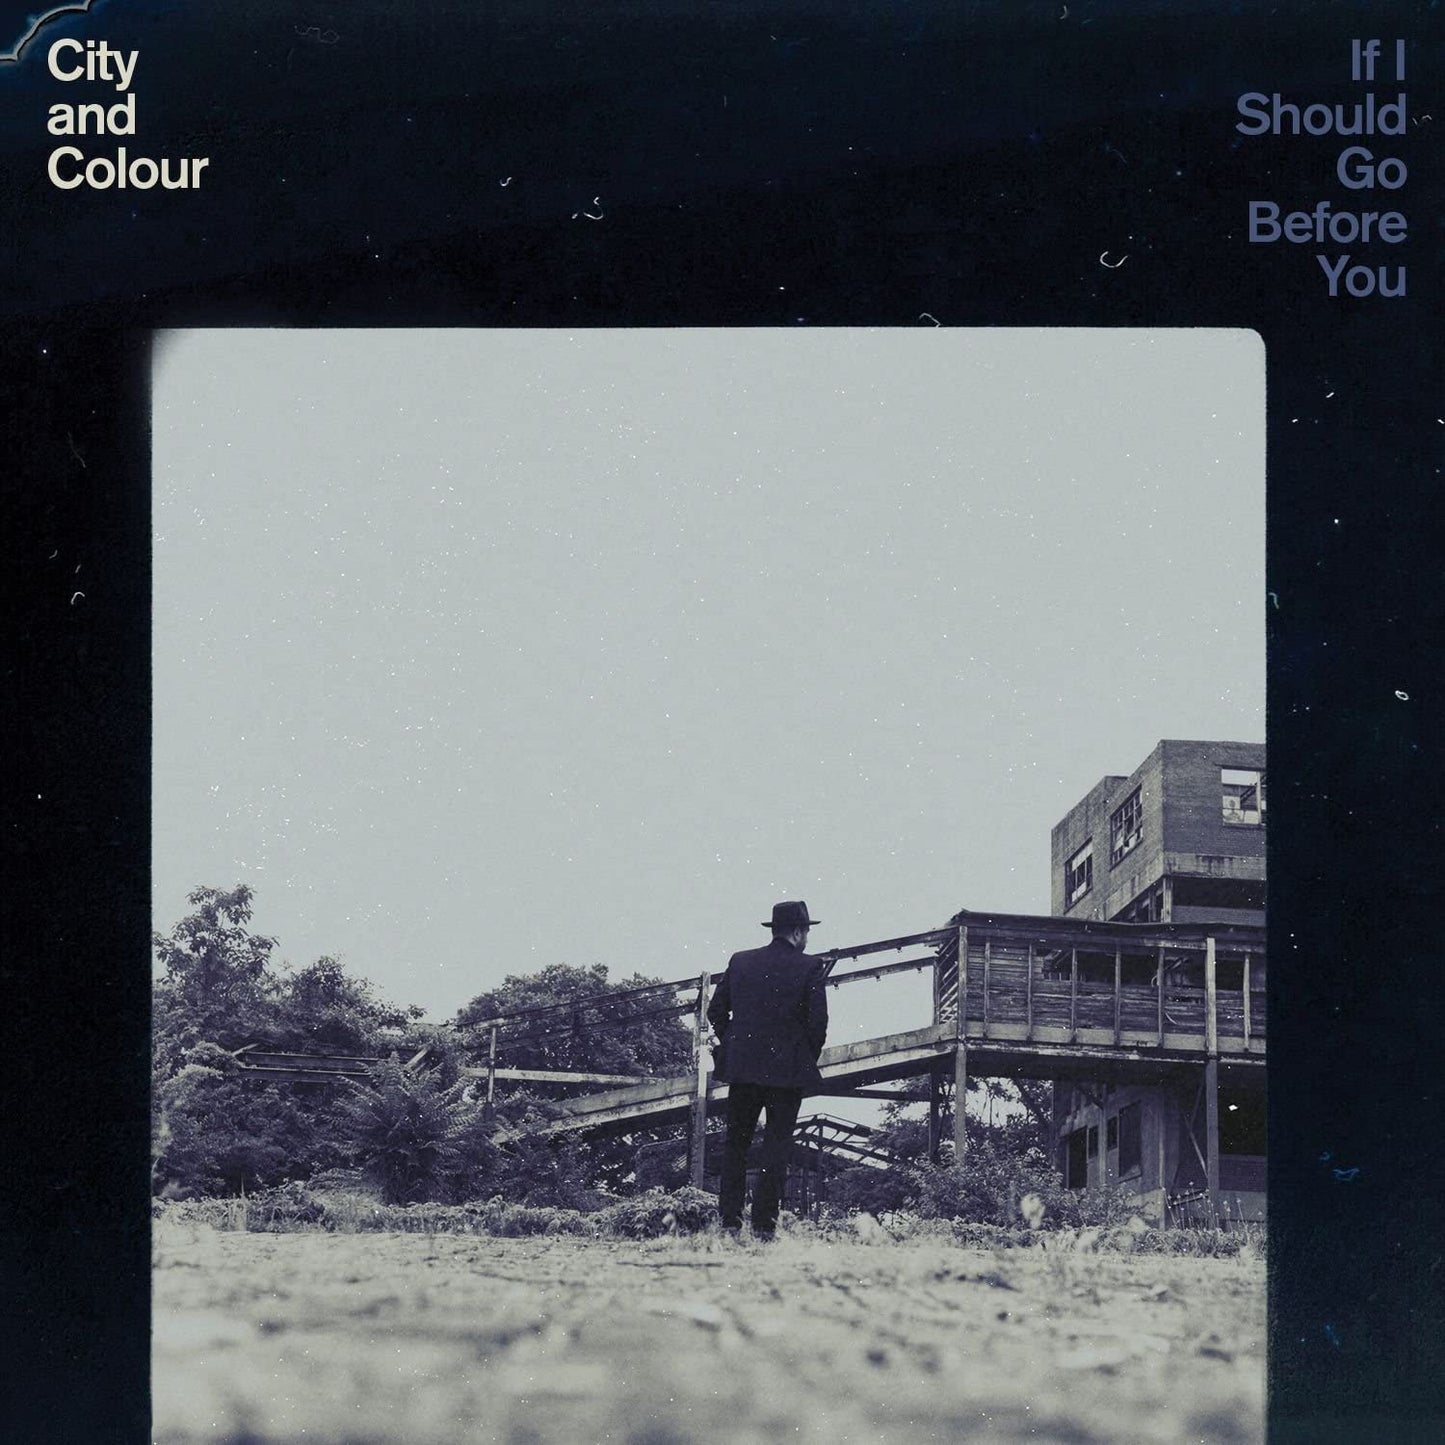 2LP - City And Colour - If I Should Go Before You - 2LP